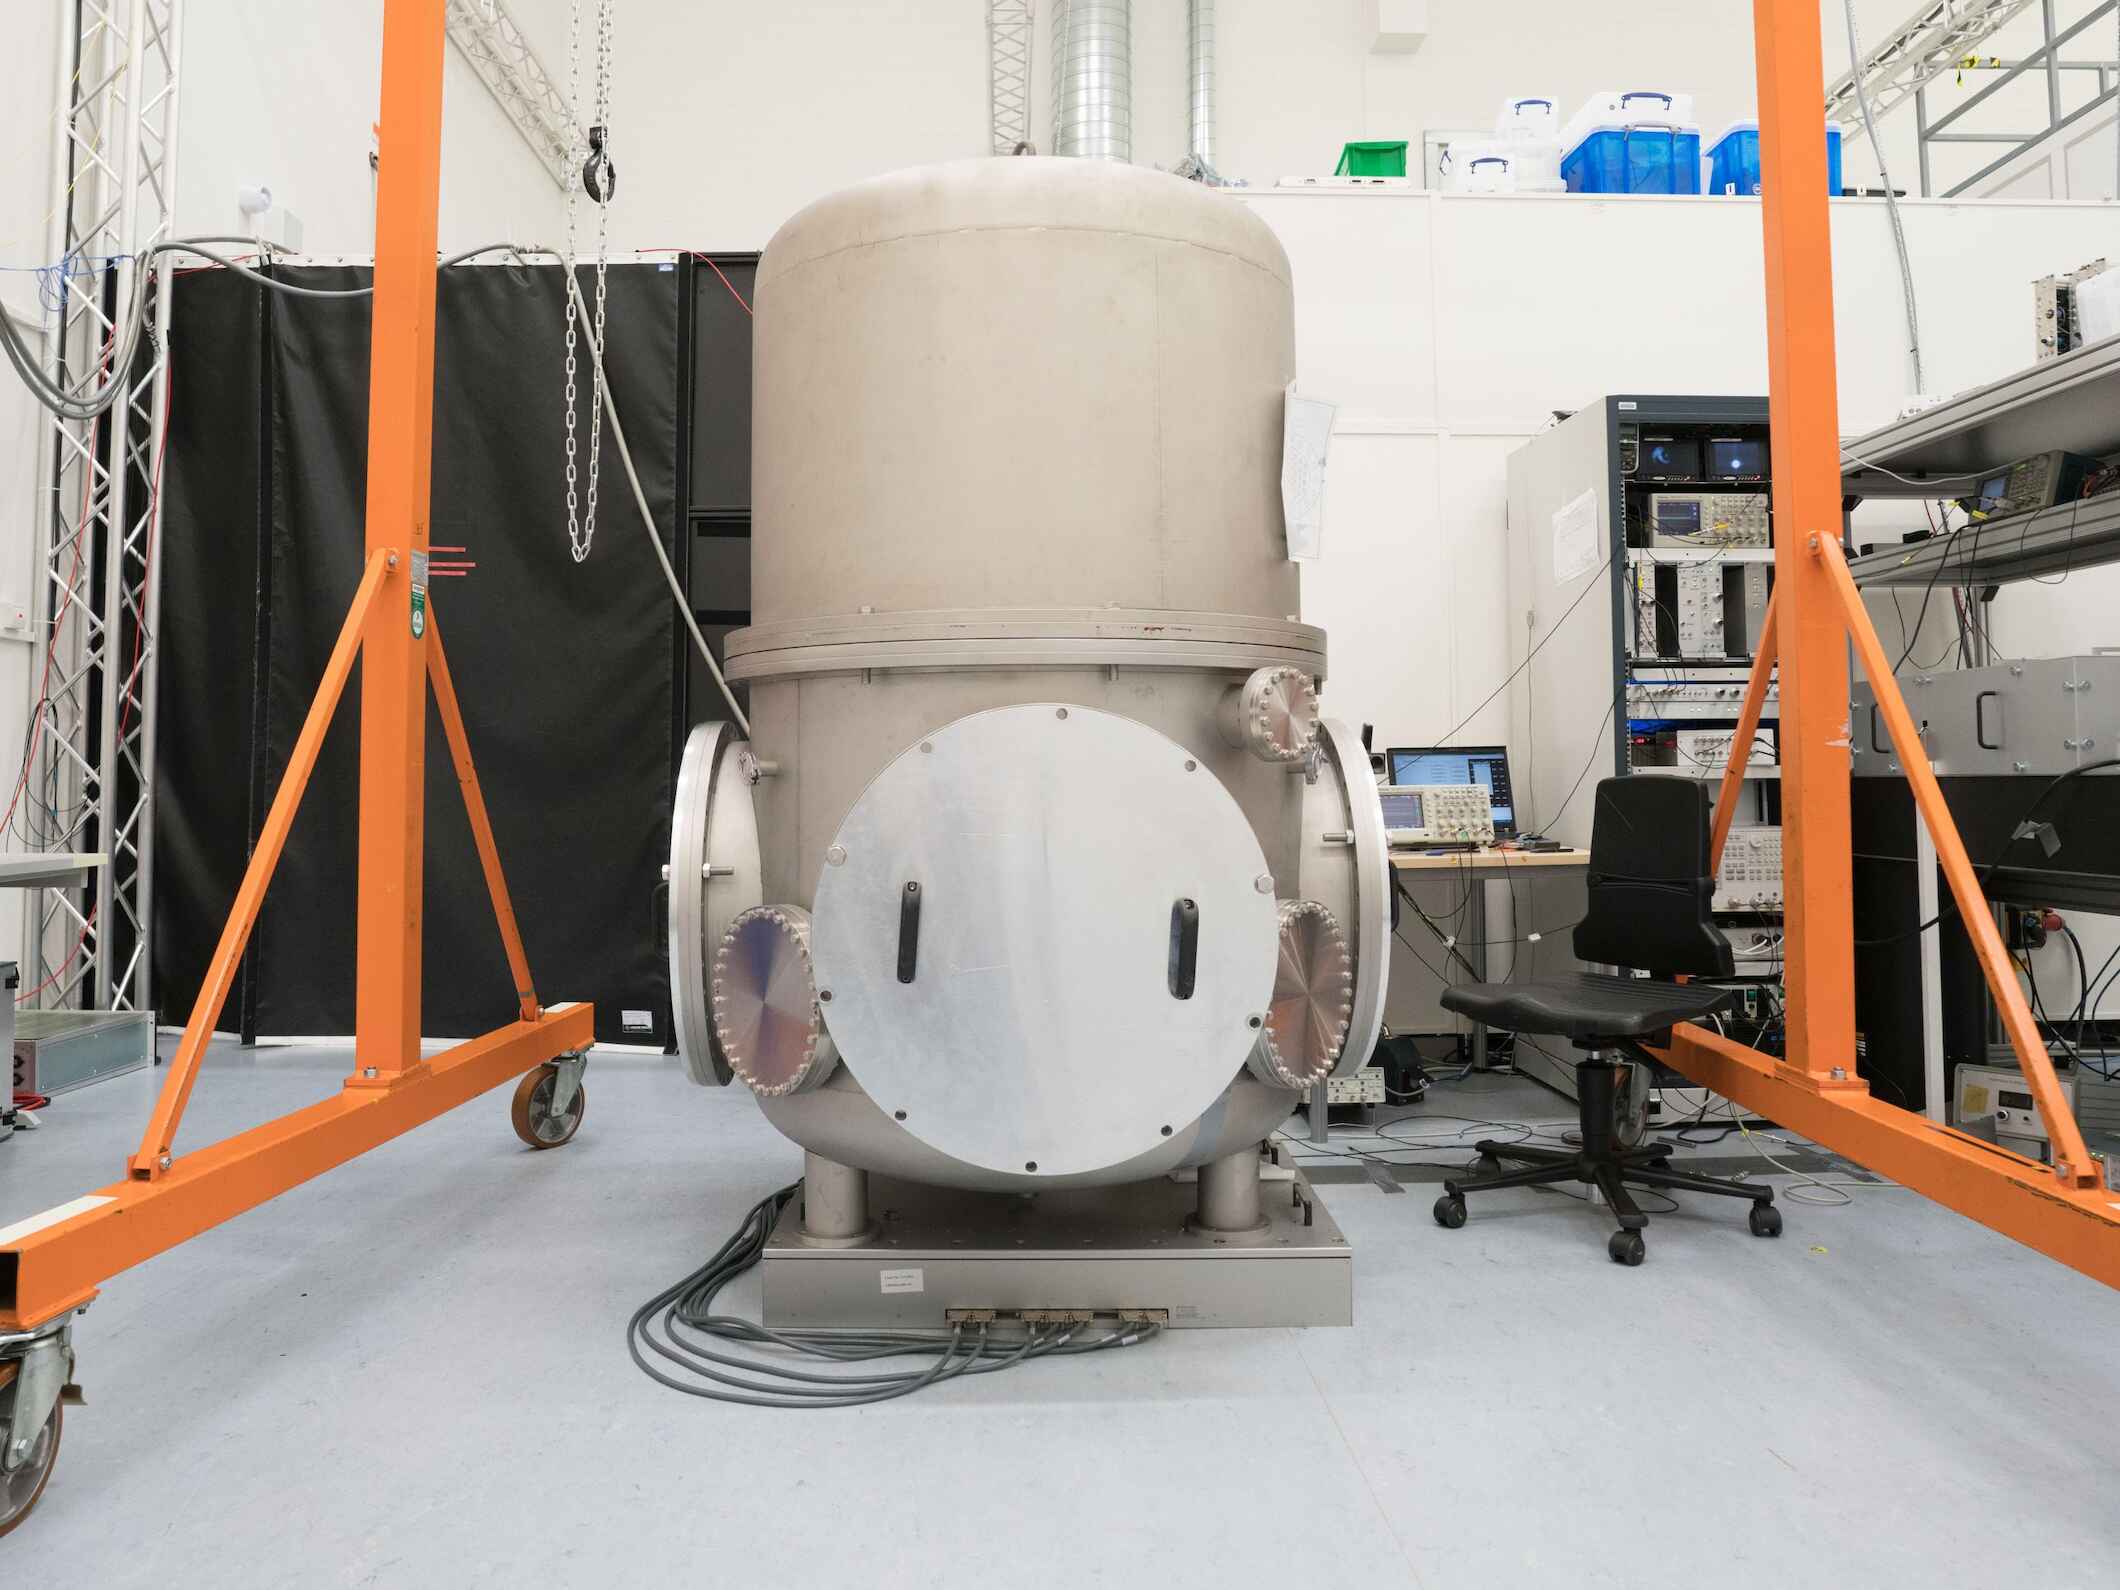 One of the vacuum tanks is being used here as a container for an optical test installation.